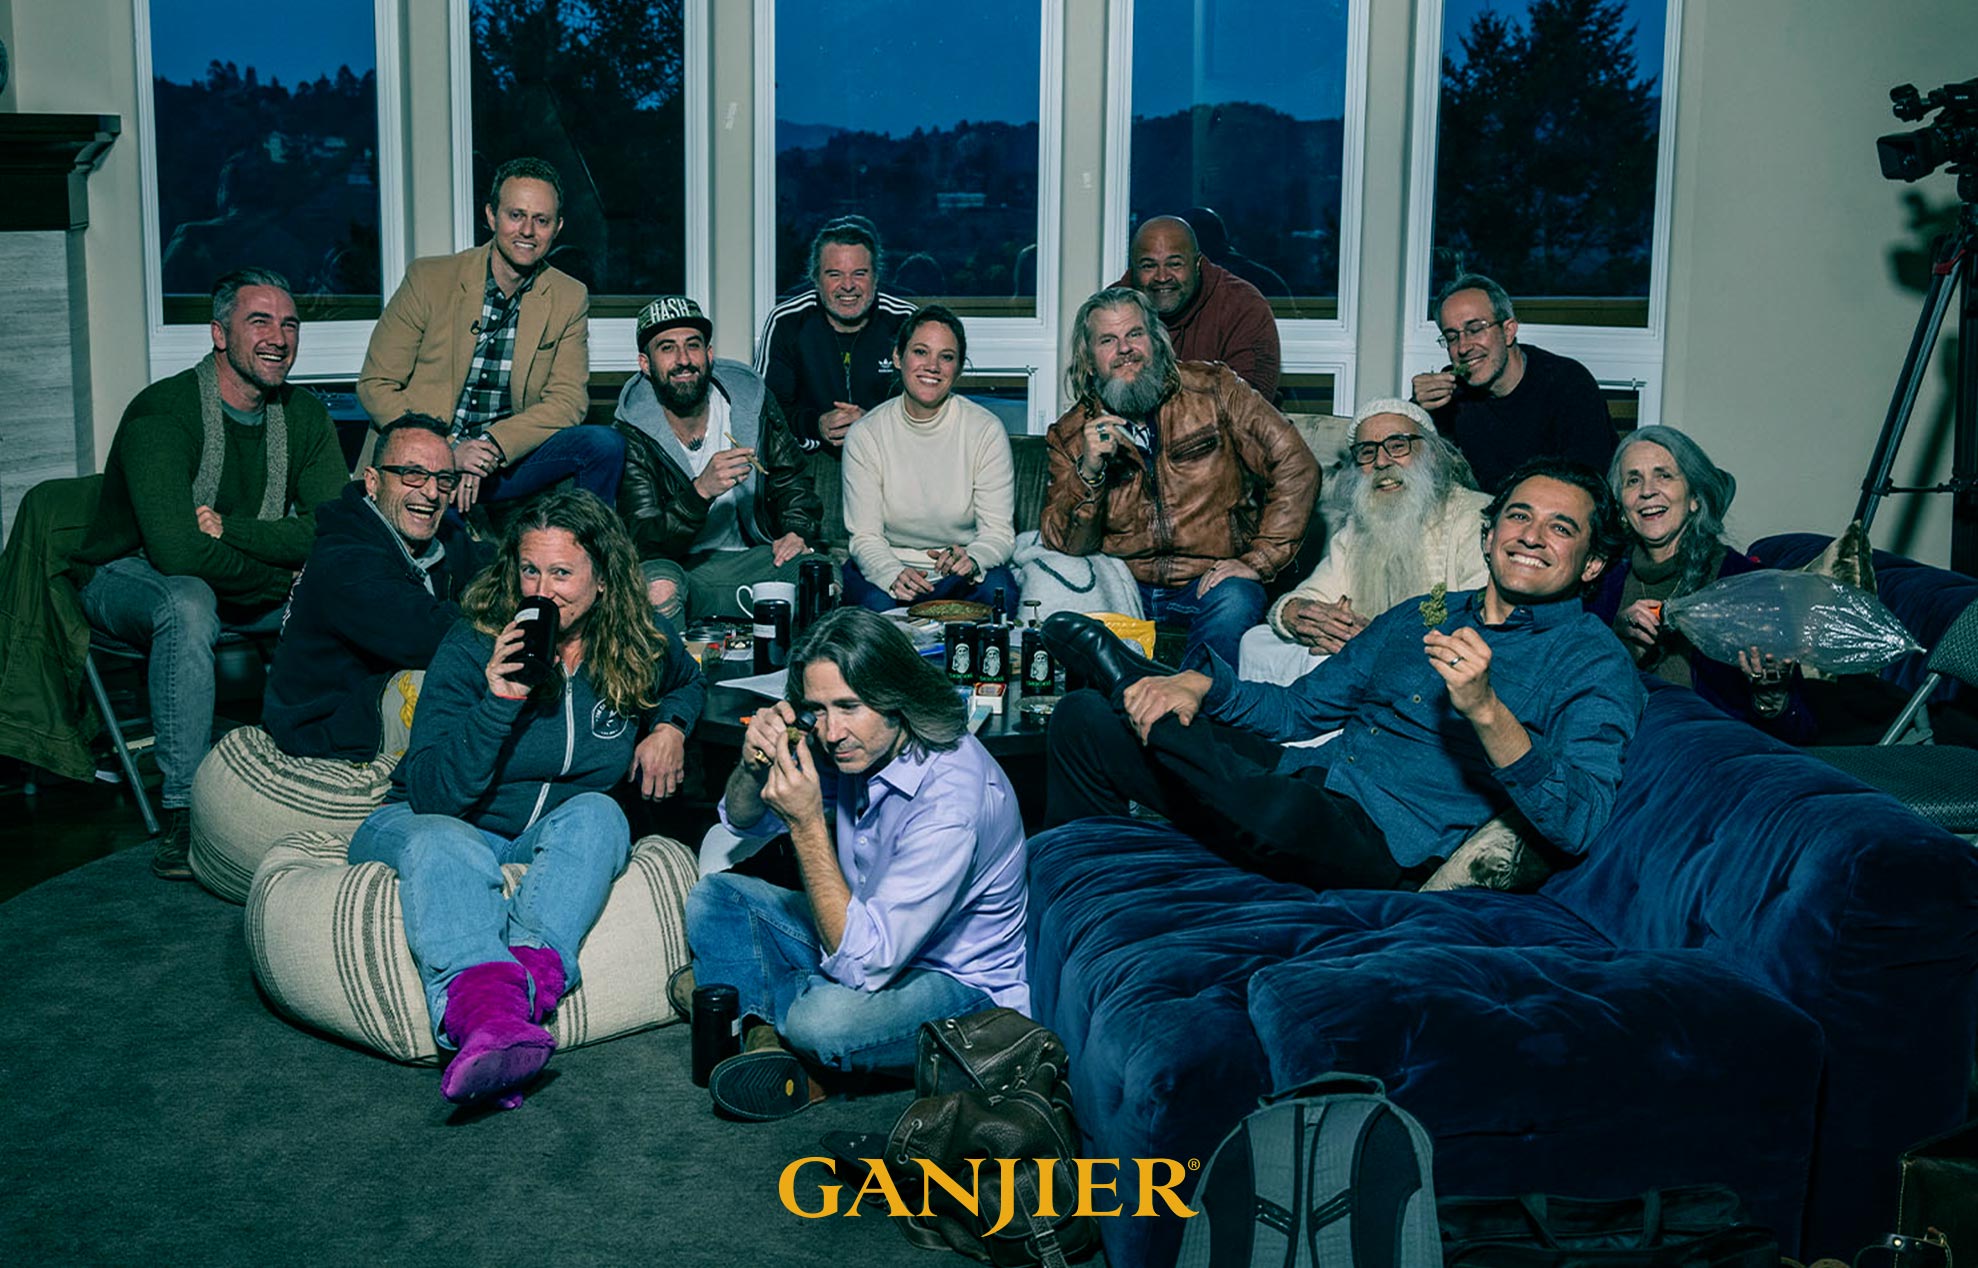 the ganjier council at a group meeting